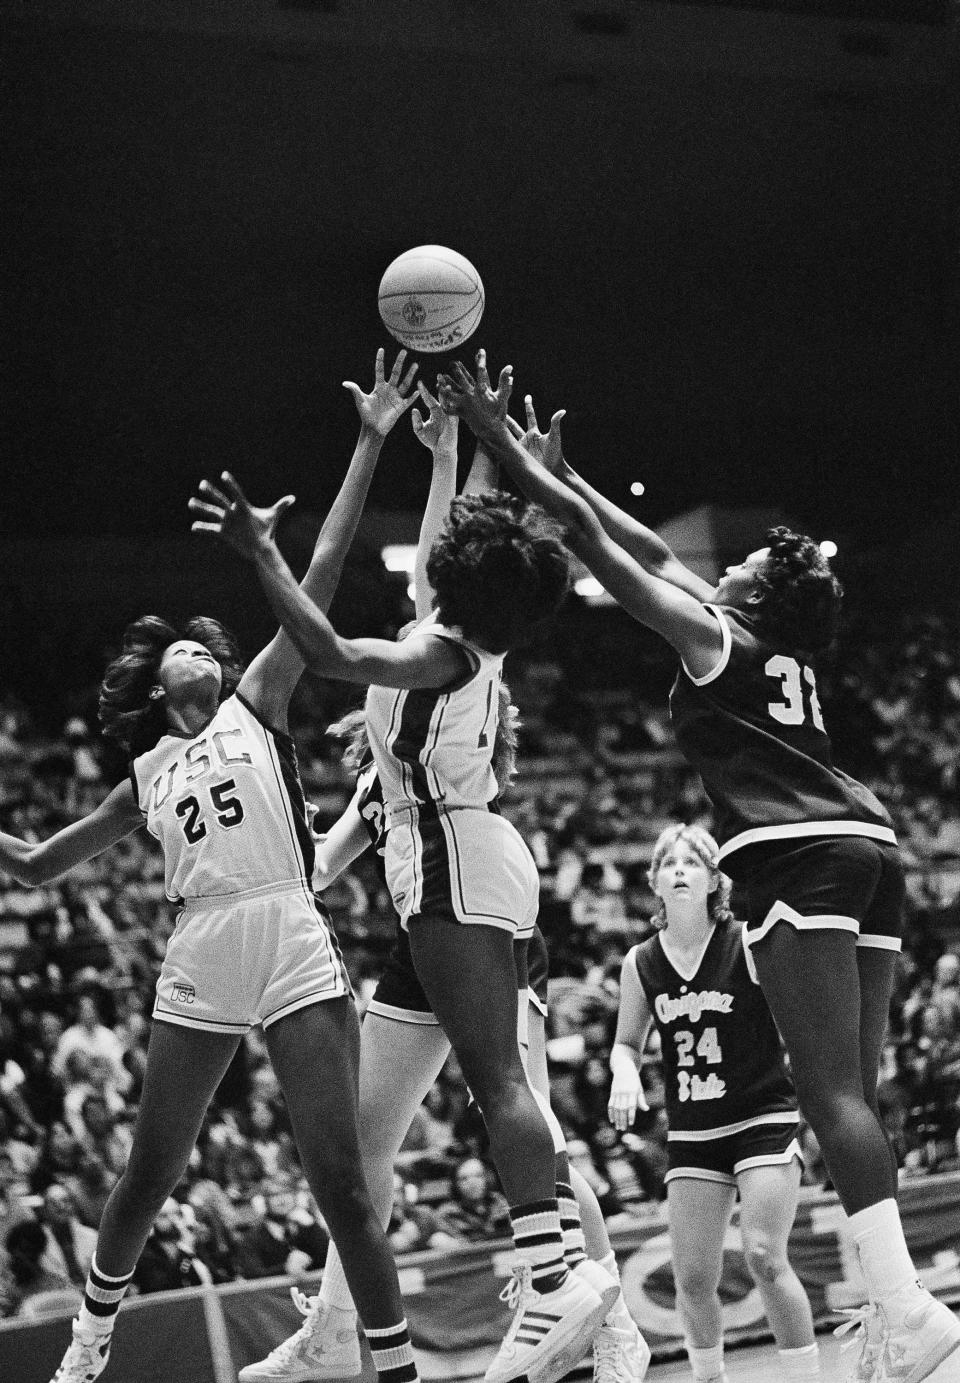 FILE -The ball bounces away from Southern Californias JaMaiia Bond (25), and Juliette Robinson, center, and Kym Hampton, right, and Jessica Wiley (24) of Arizona State during their NCAA West Region Womens Basketball Championship game, Thursday, March 25, 1983, Los Angeles. How well do you think you know the women’s NCAA Tournament? Try your luck at this AP trivia quiz about the history of March Madness. Don’t cheat! (AP Photo/Nick Ut, File)